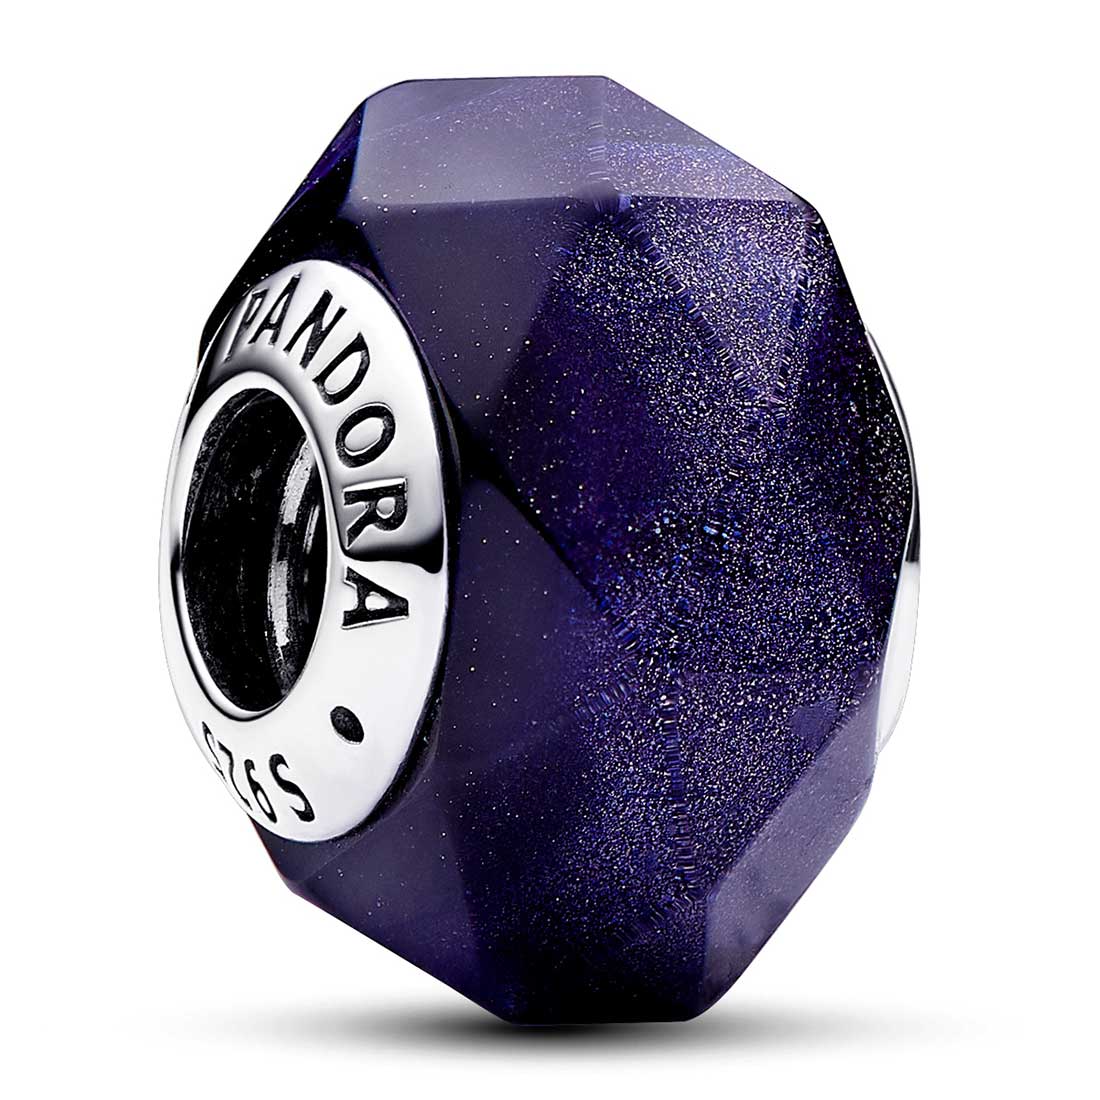 Authentic Pandora Purple Faceted Murano Glass Charm Sterling 